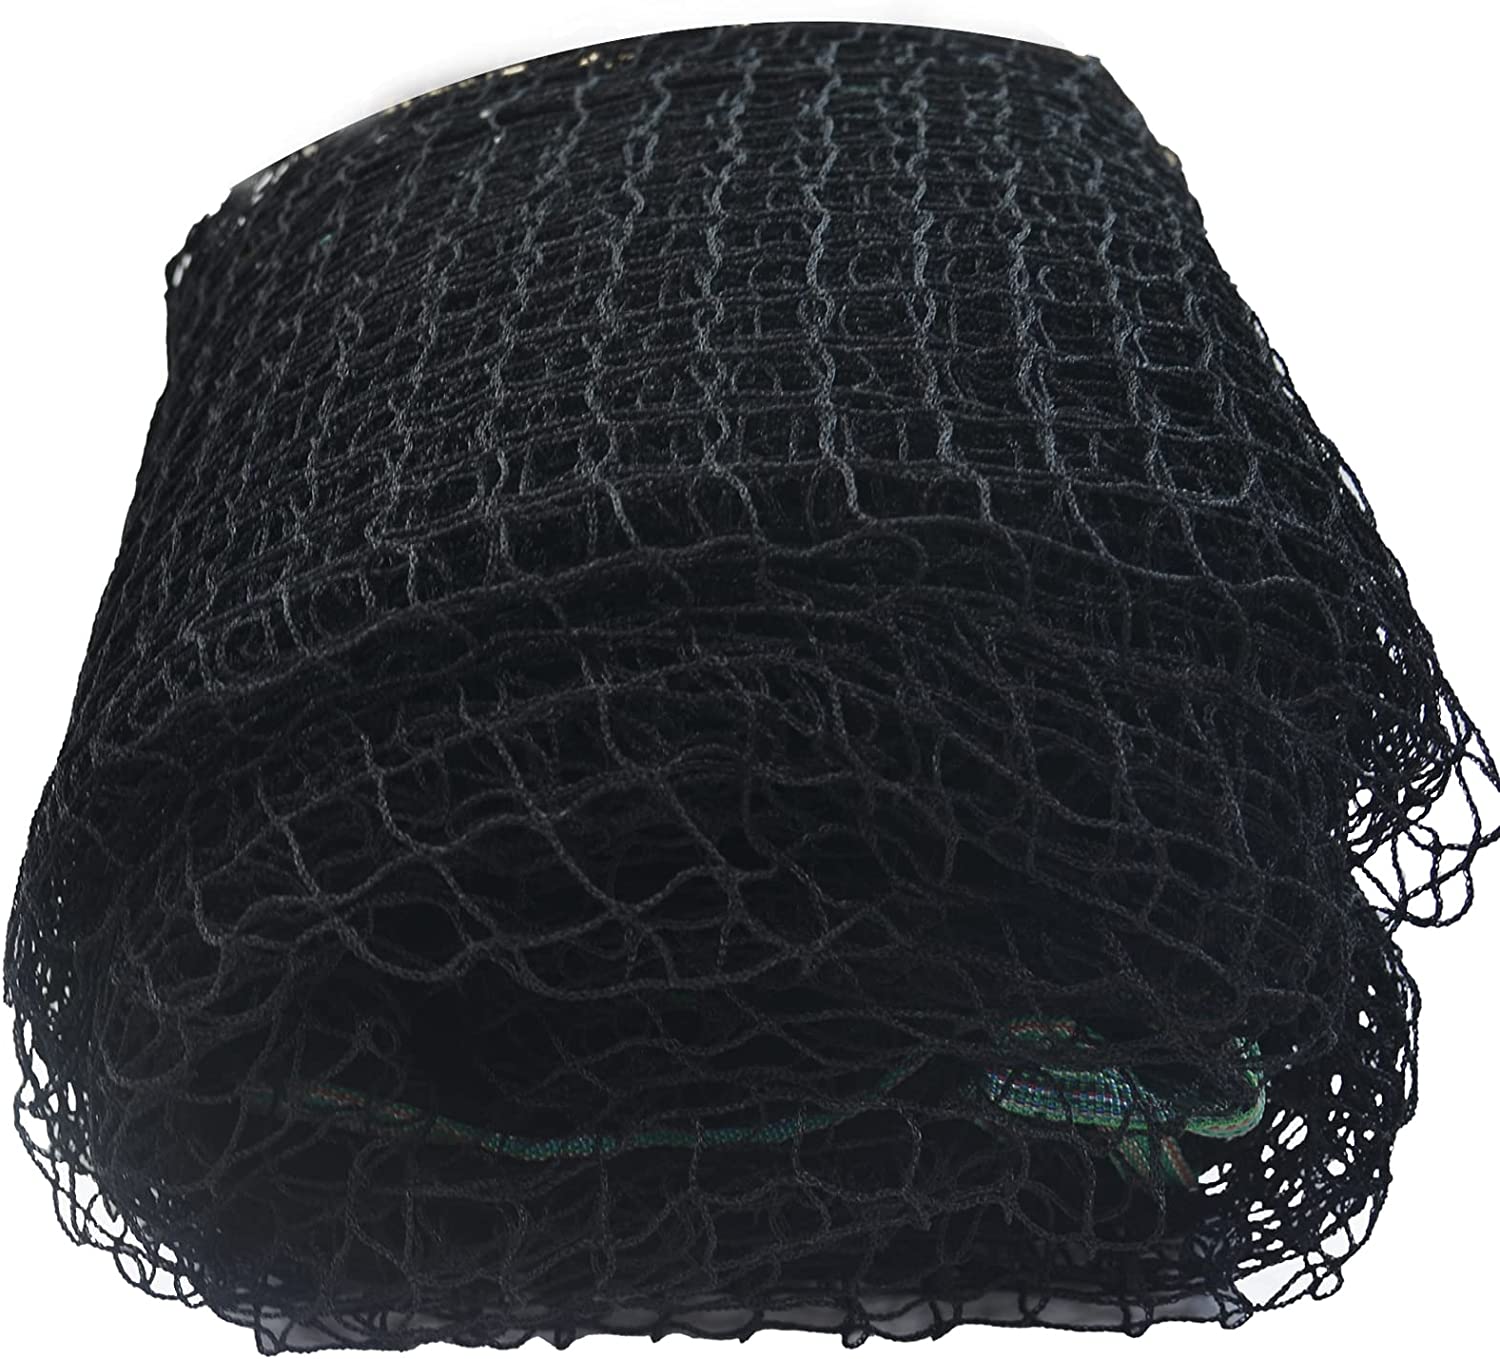 Gagalileo 13x10x10FT Baseball Batting Cage Replacement Net